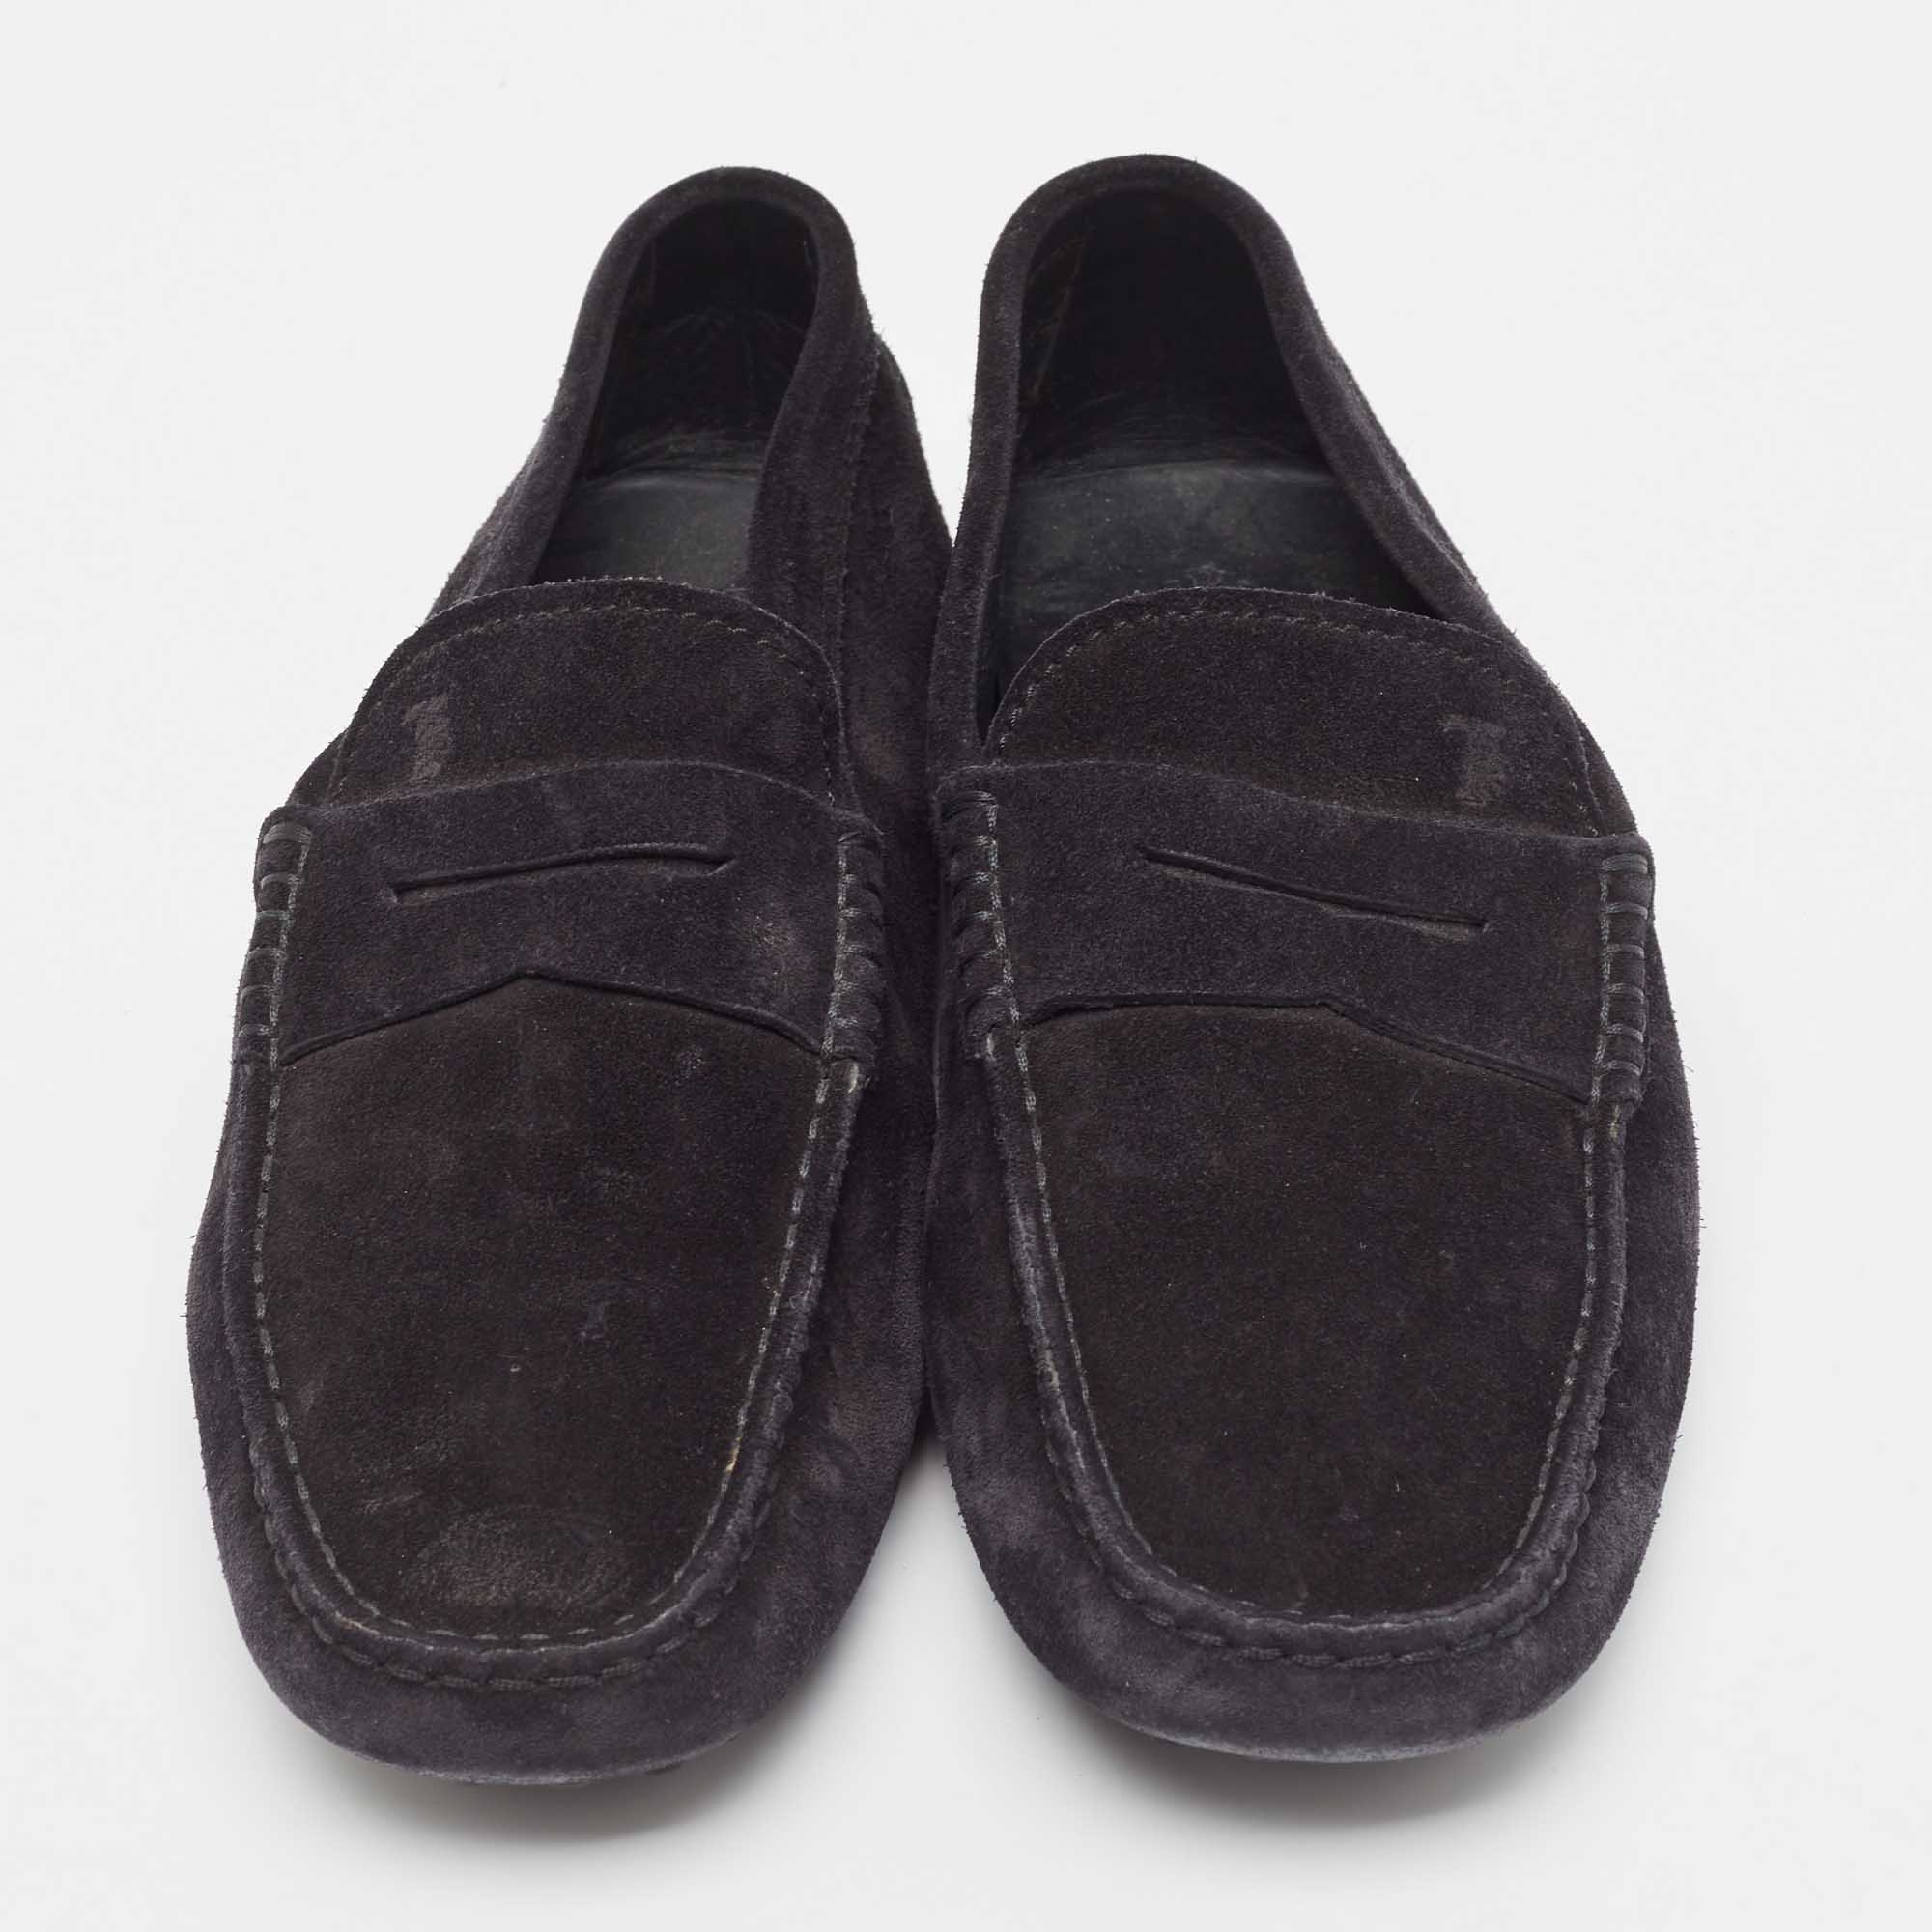 Tod's Black Suede Penny Loafers Size 39